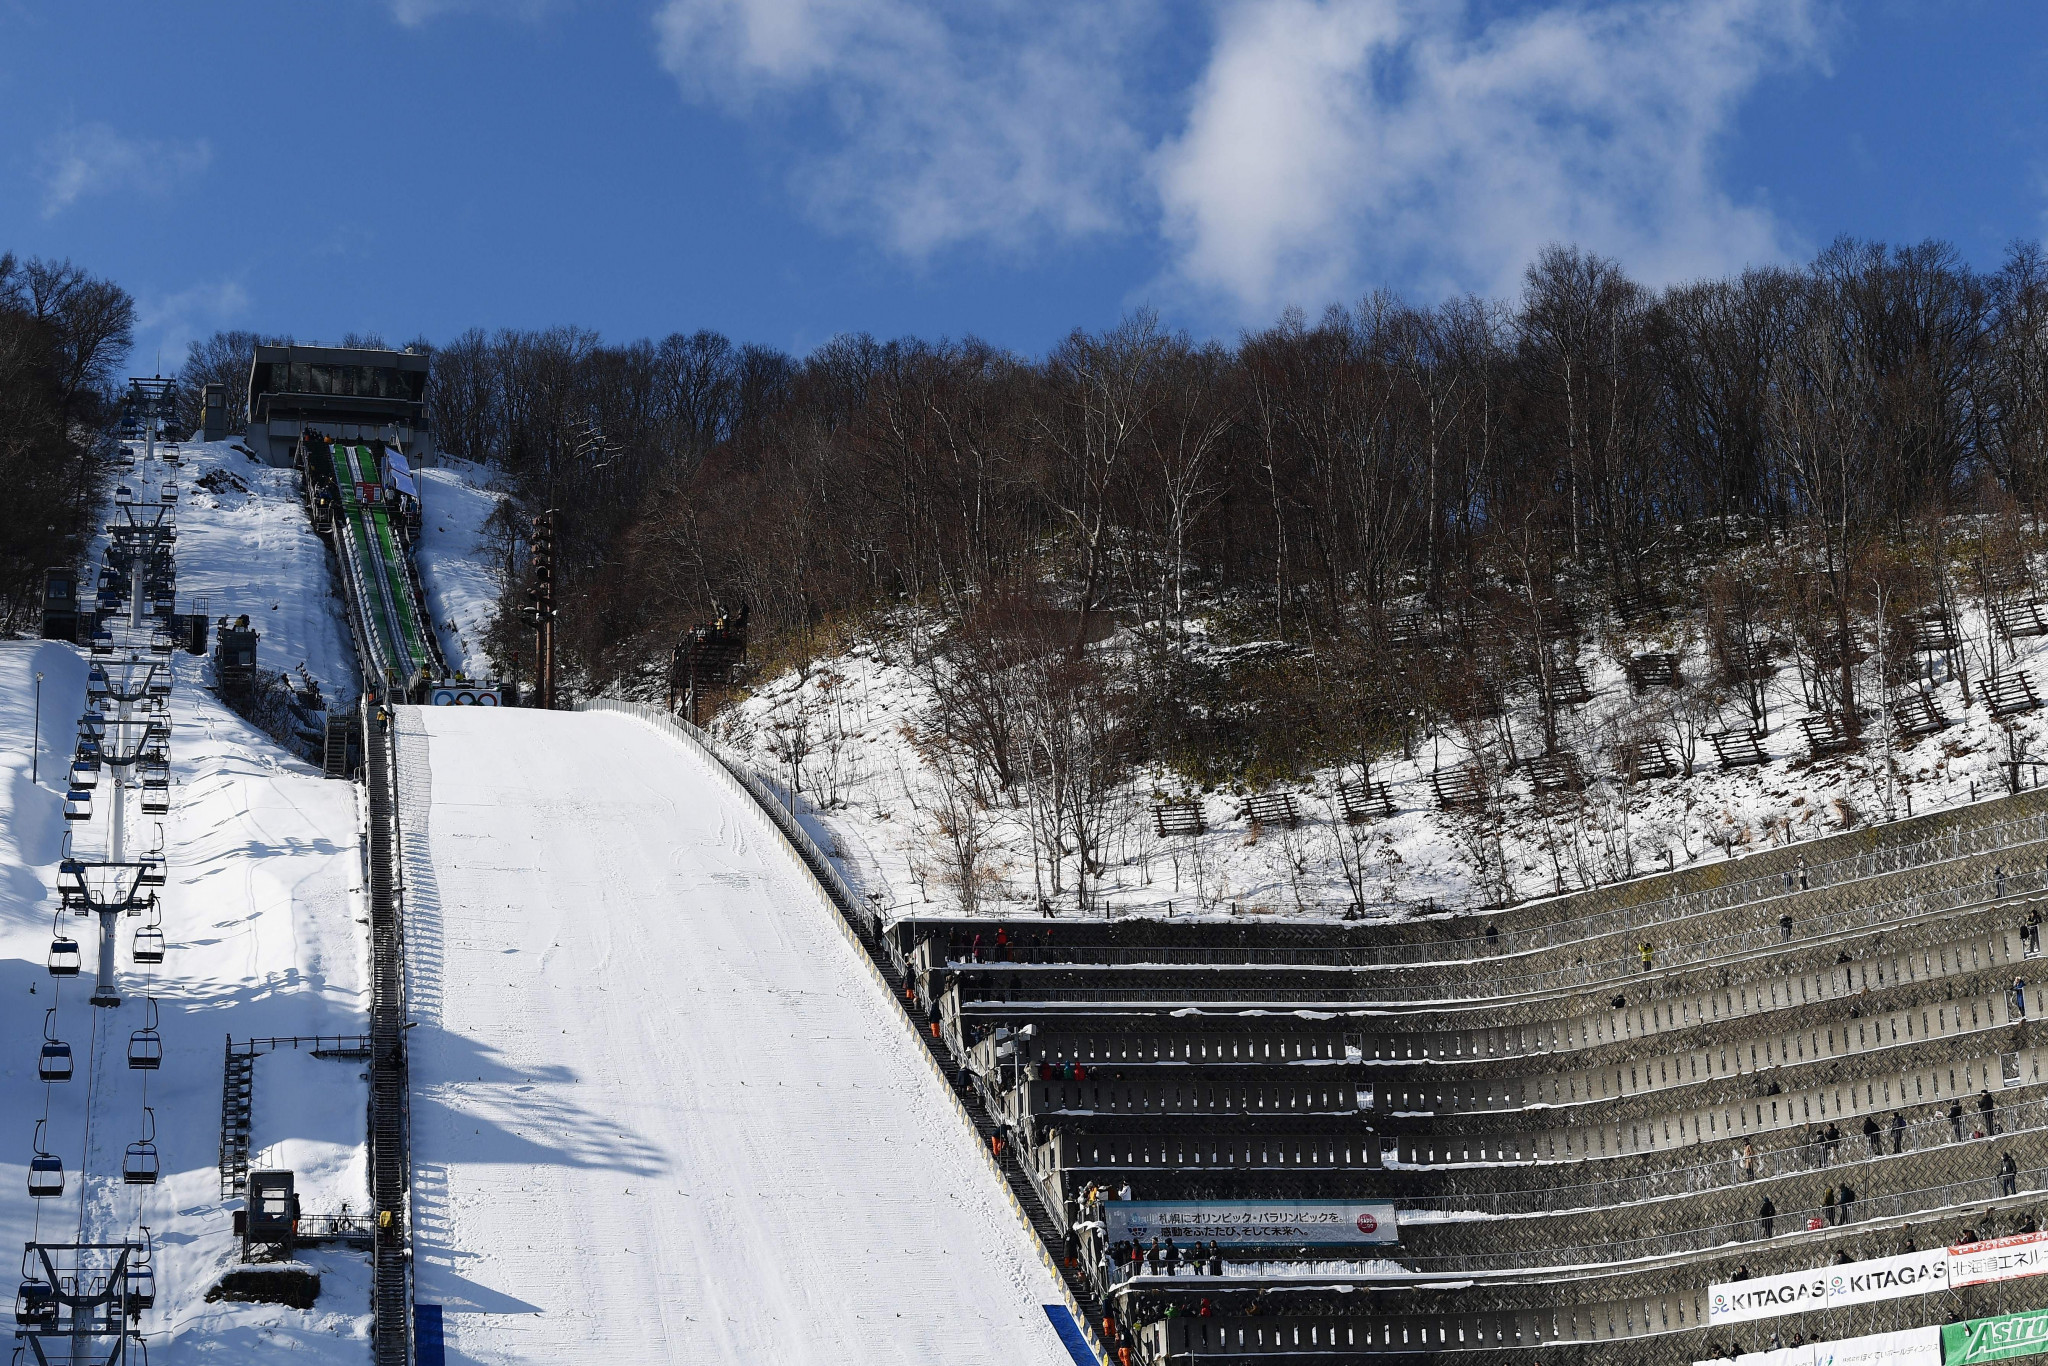 Ski Jumping World Cup events in Japan cancelled due to COVID-19